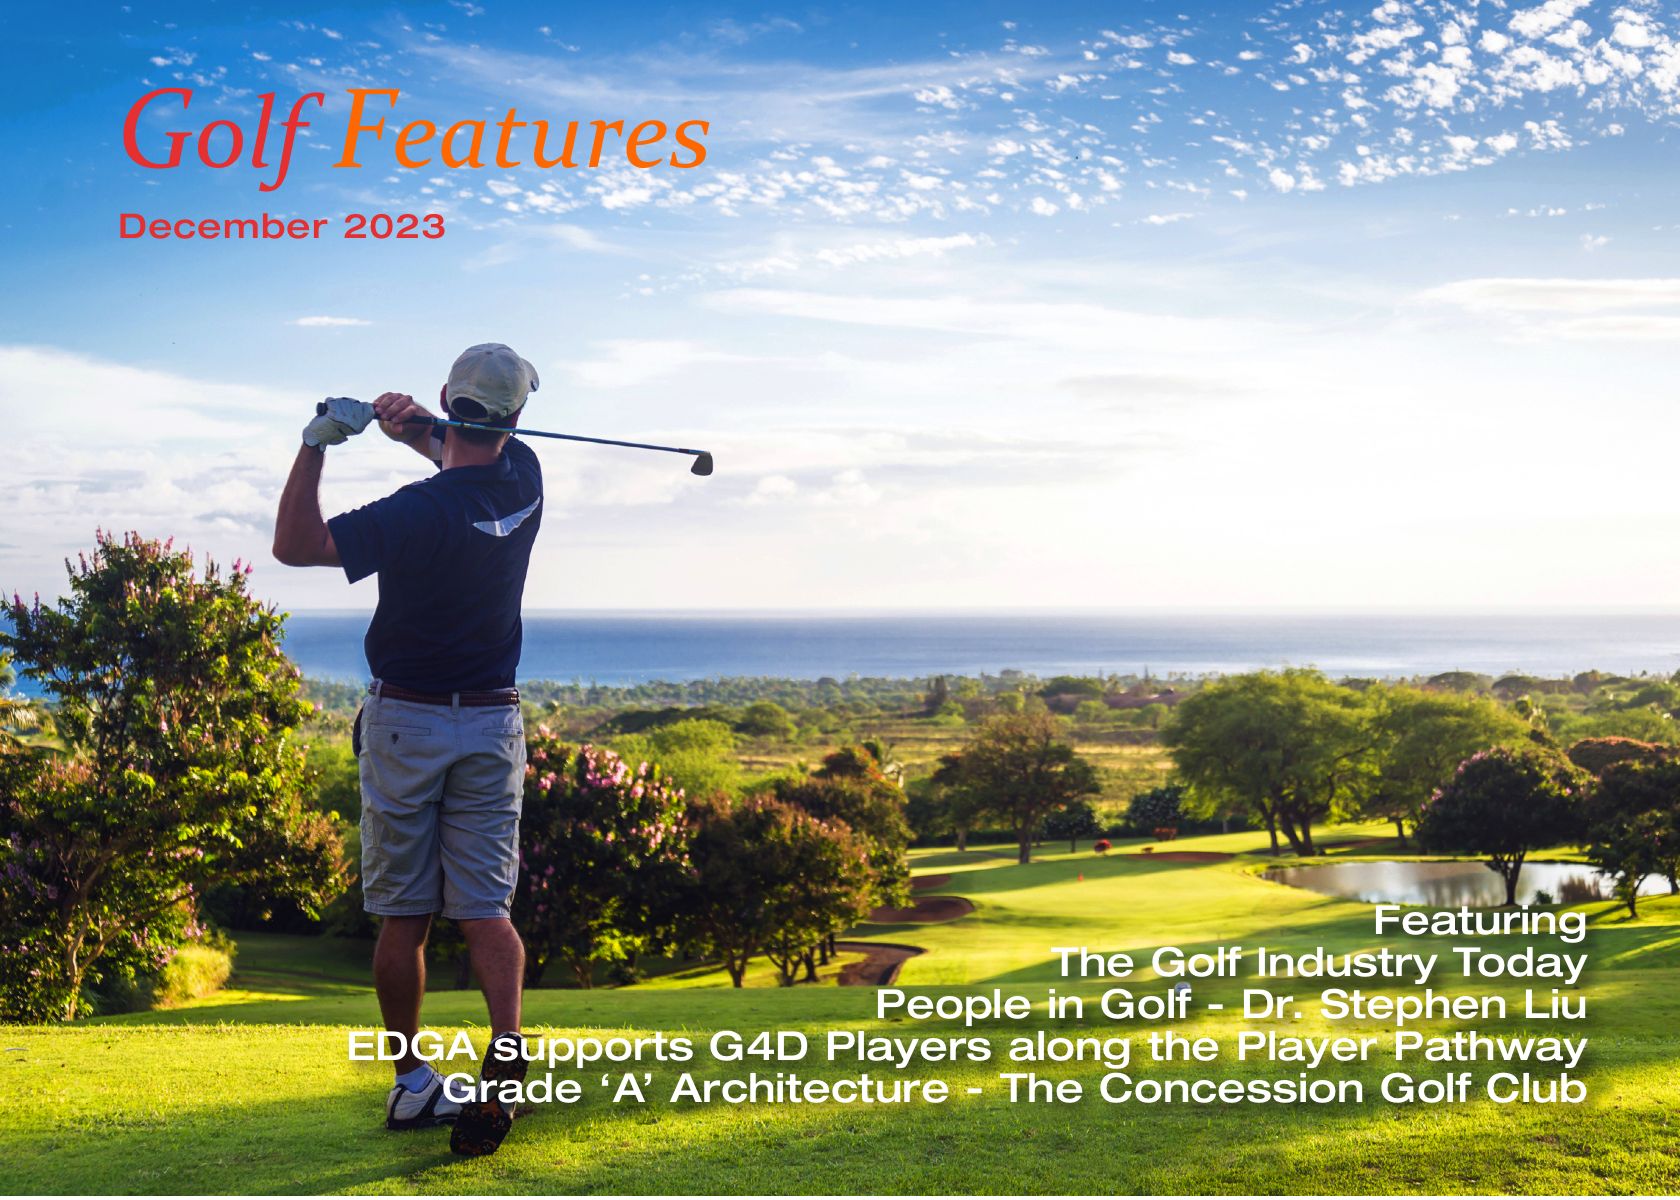 Golf Features